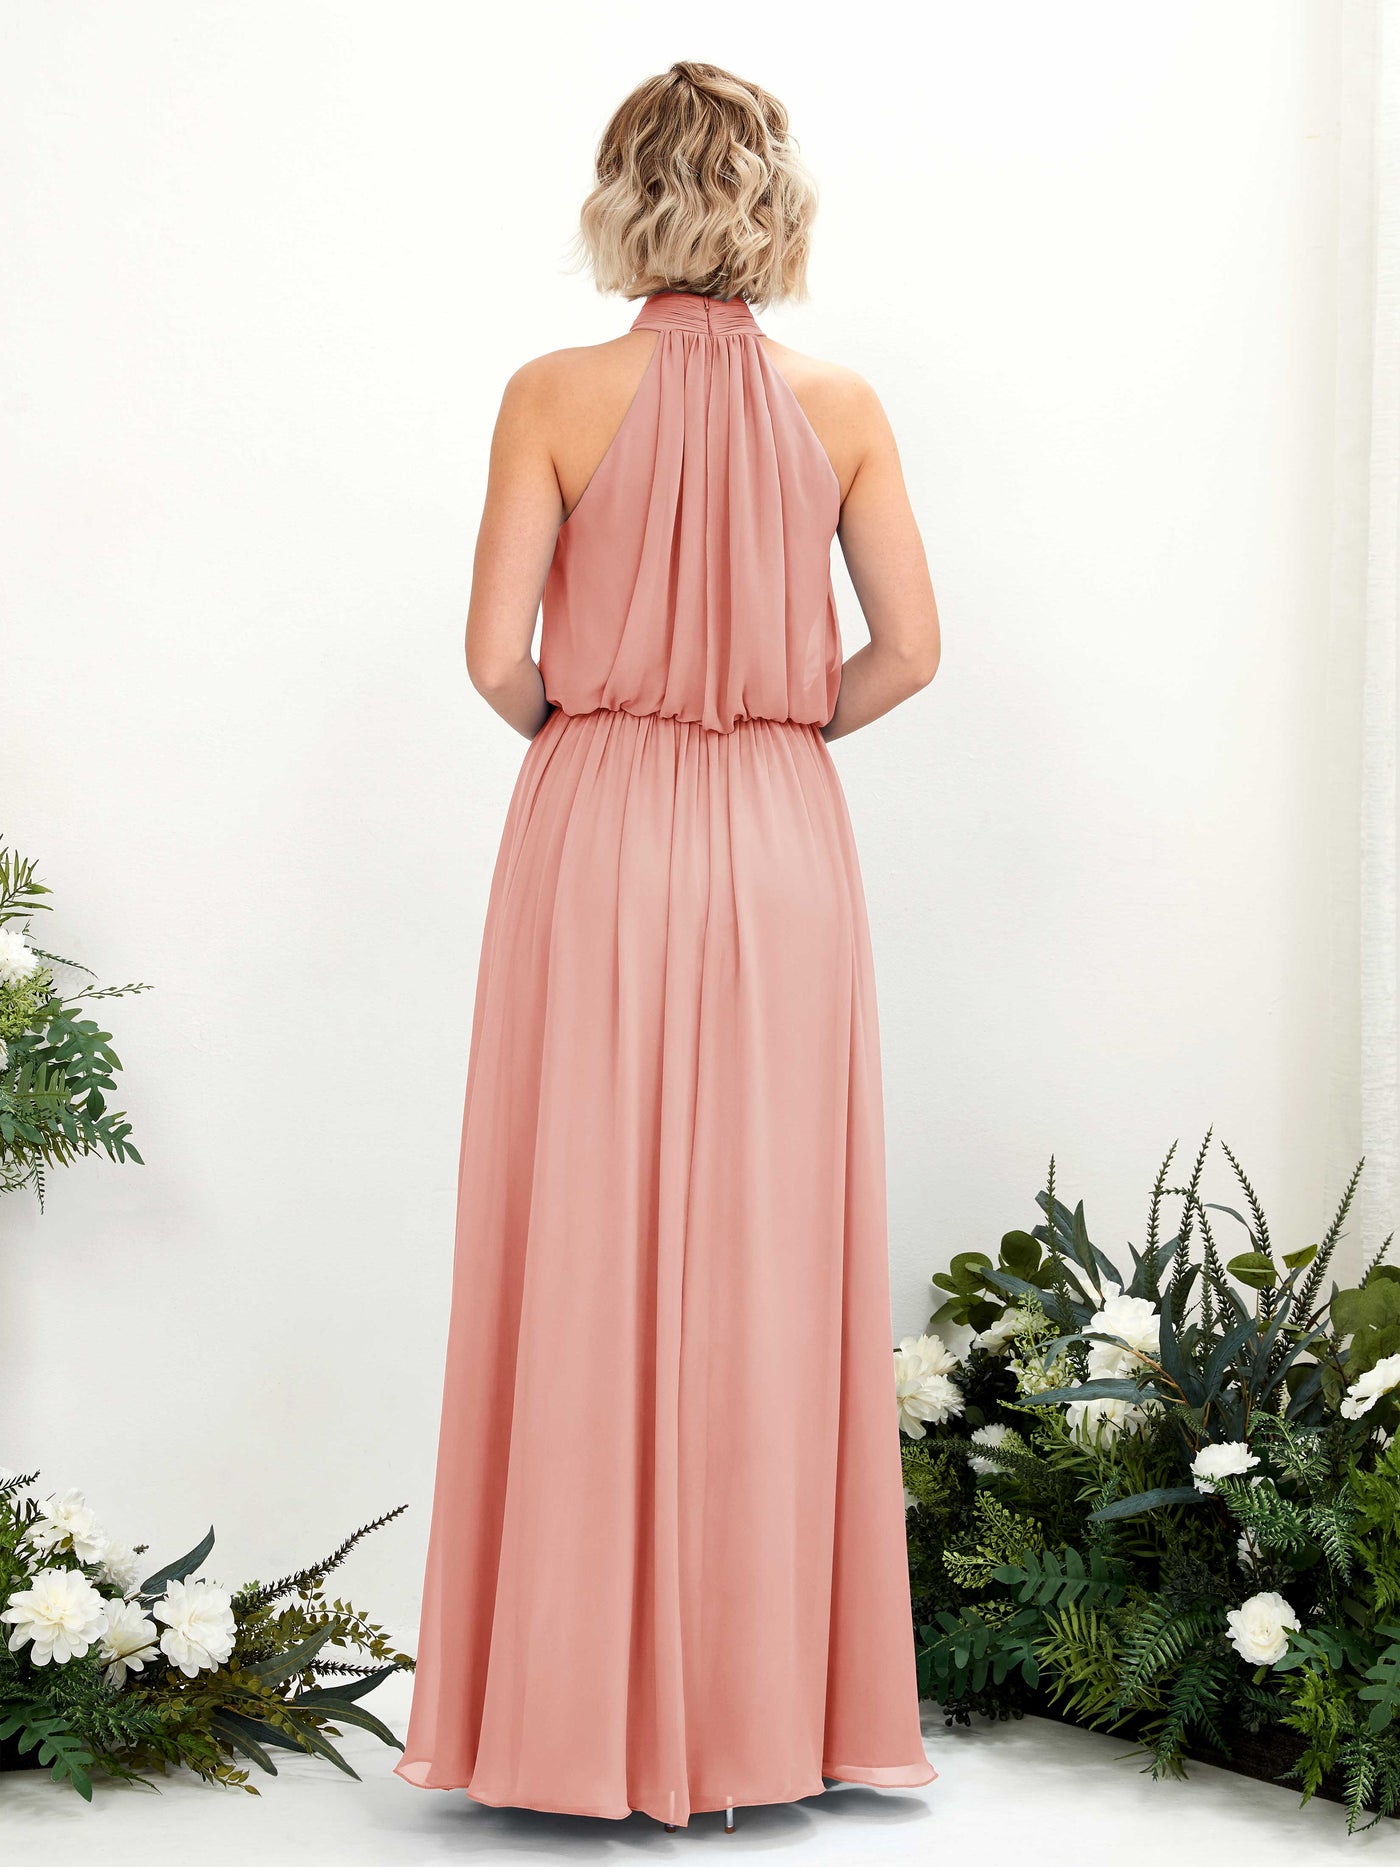 Champagne Rose Bridesmaid Dresses Bridesmaid Dress A-line Chiffon Halter Full Length Sleeveless Wedding Party Dress (81222906)#color_champagne-rose